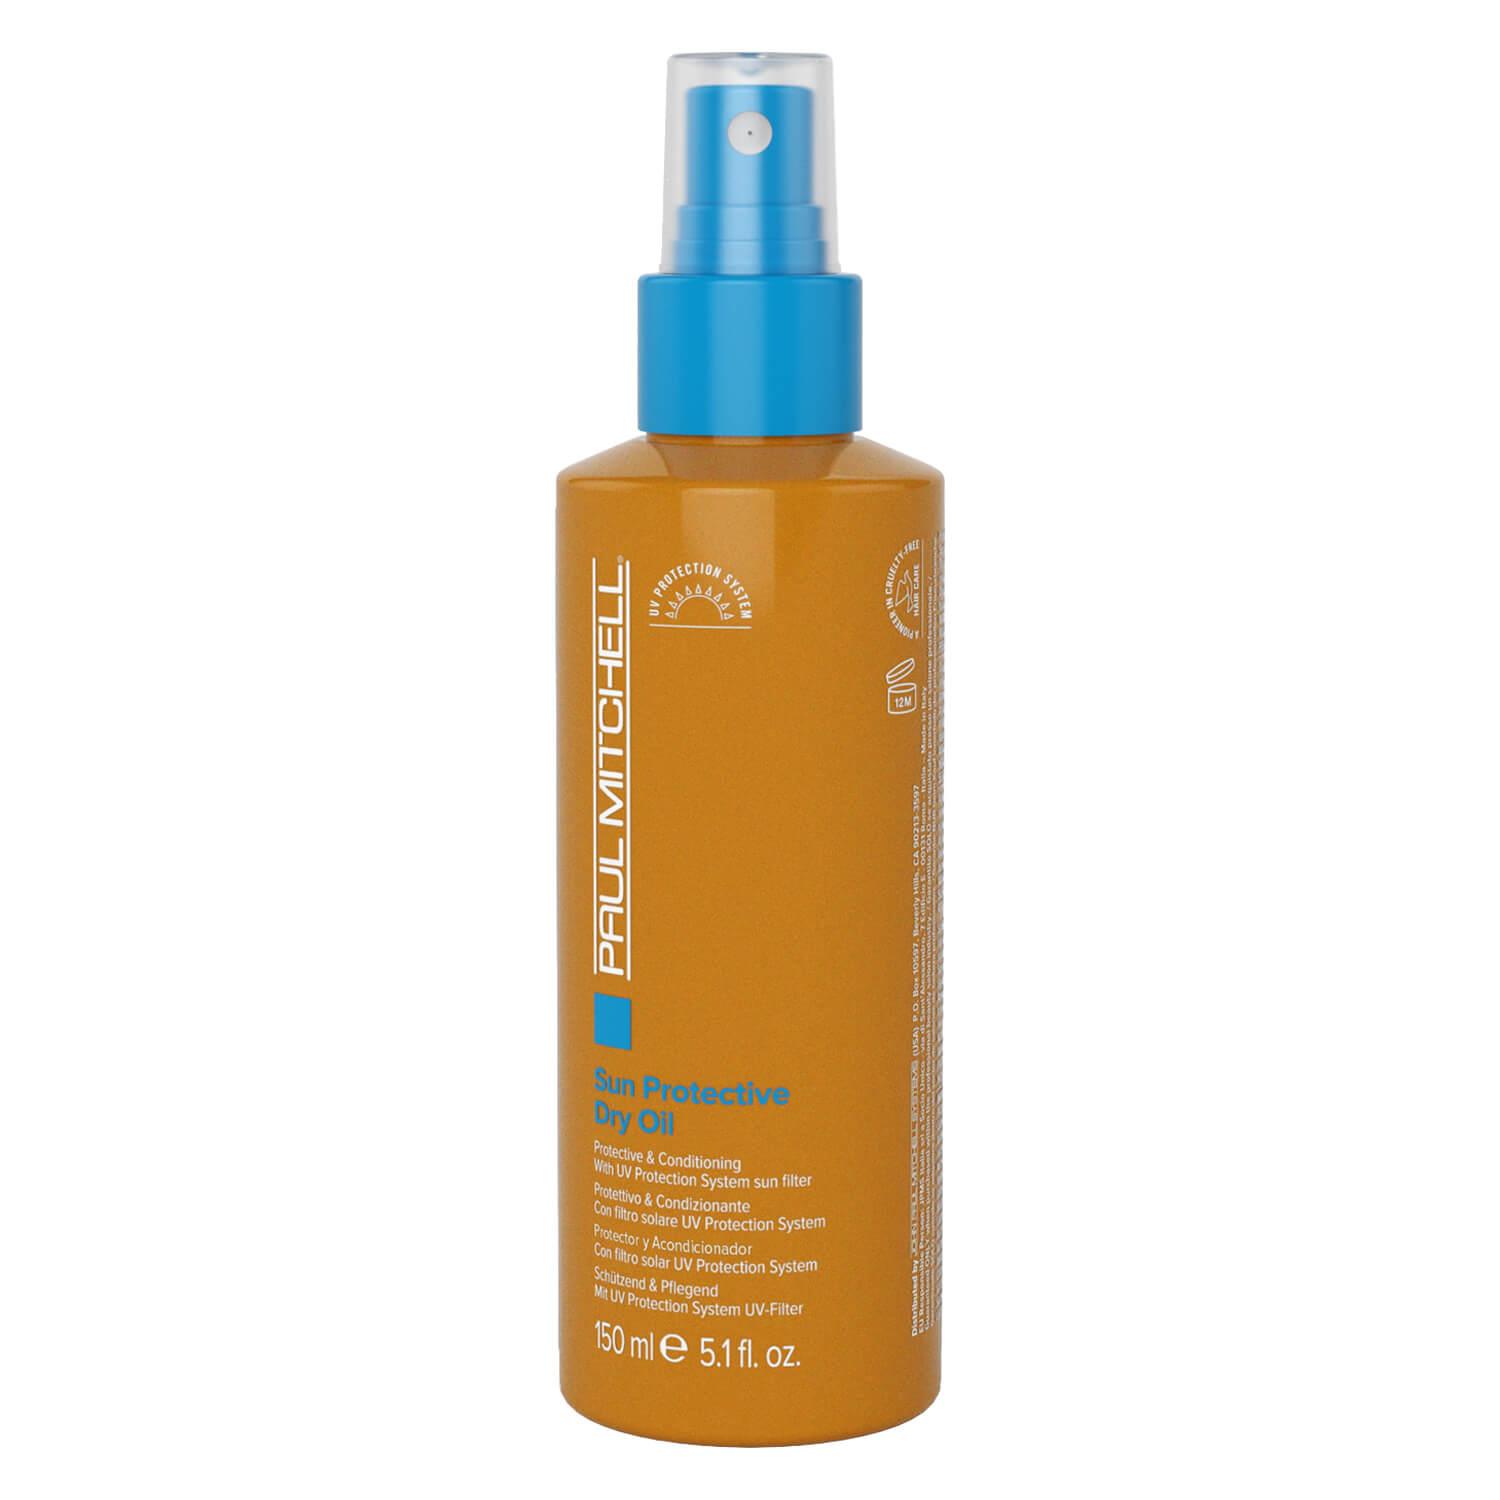 Paul Mitchell Sun - Protective Dry Oil